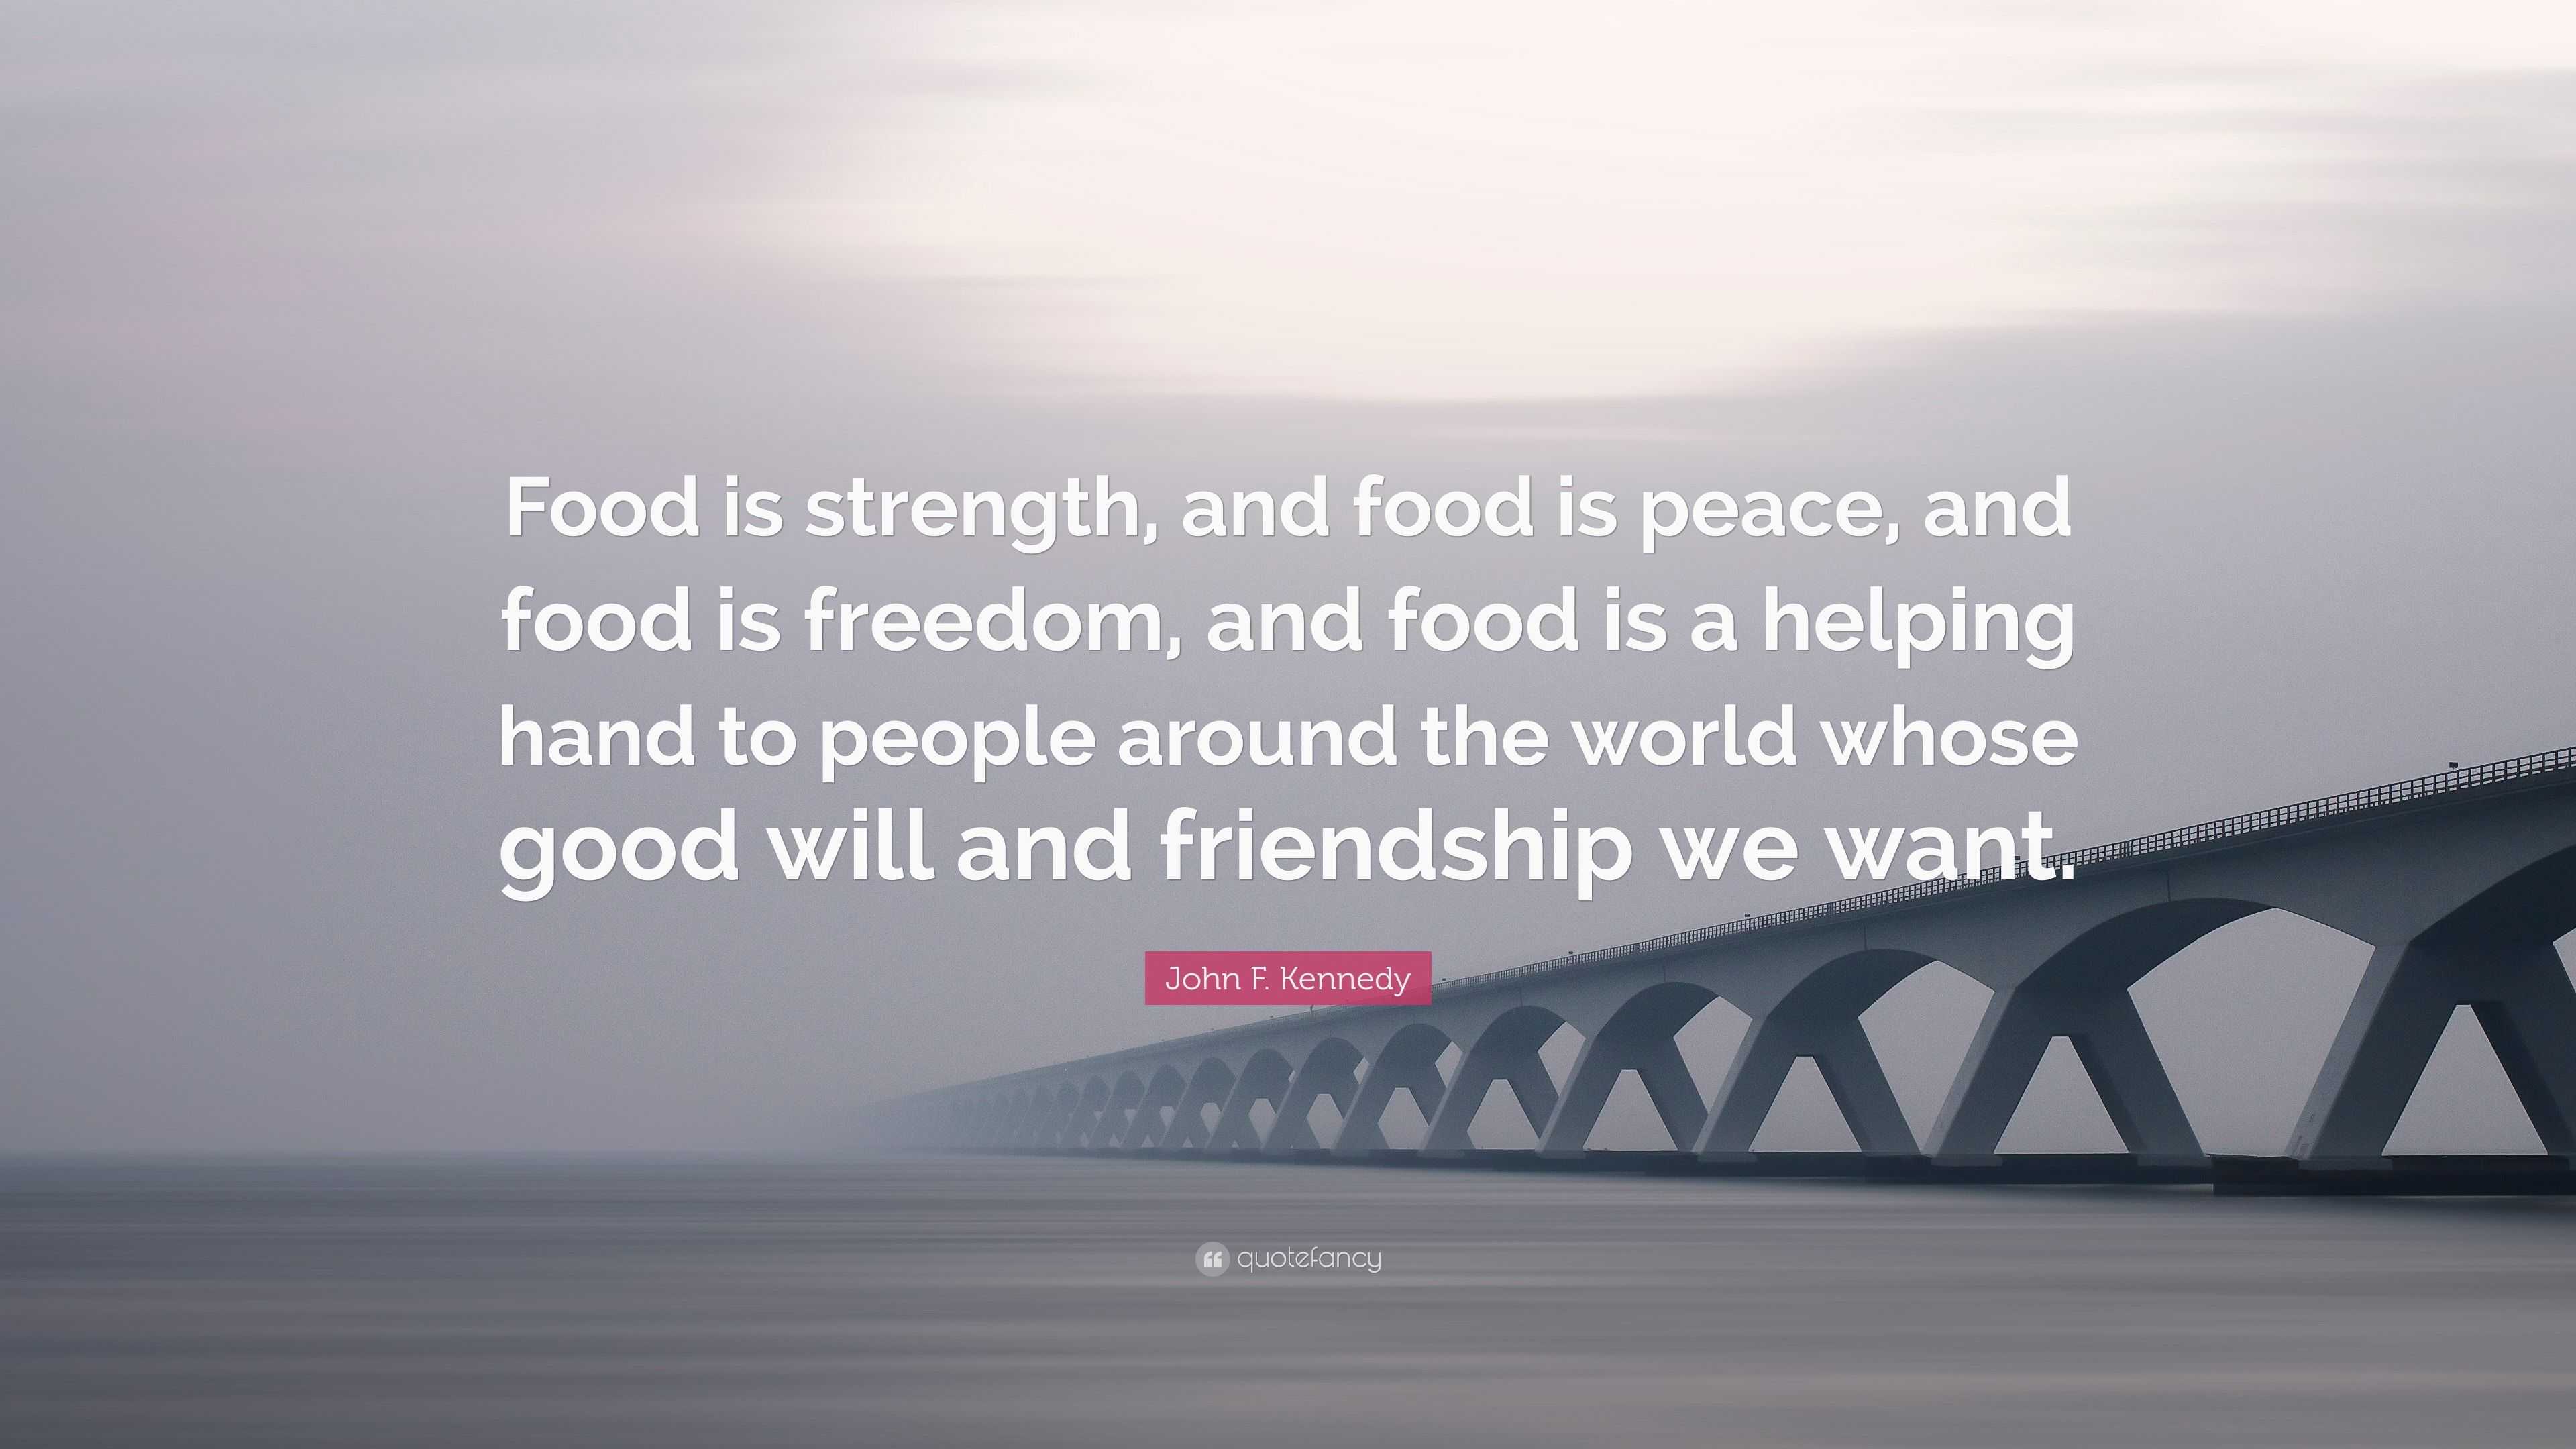 John F. Kennedy Quote: “Food is strength, and food is peace, and food